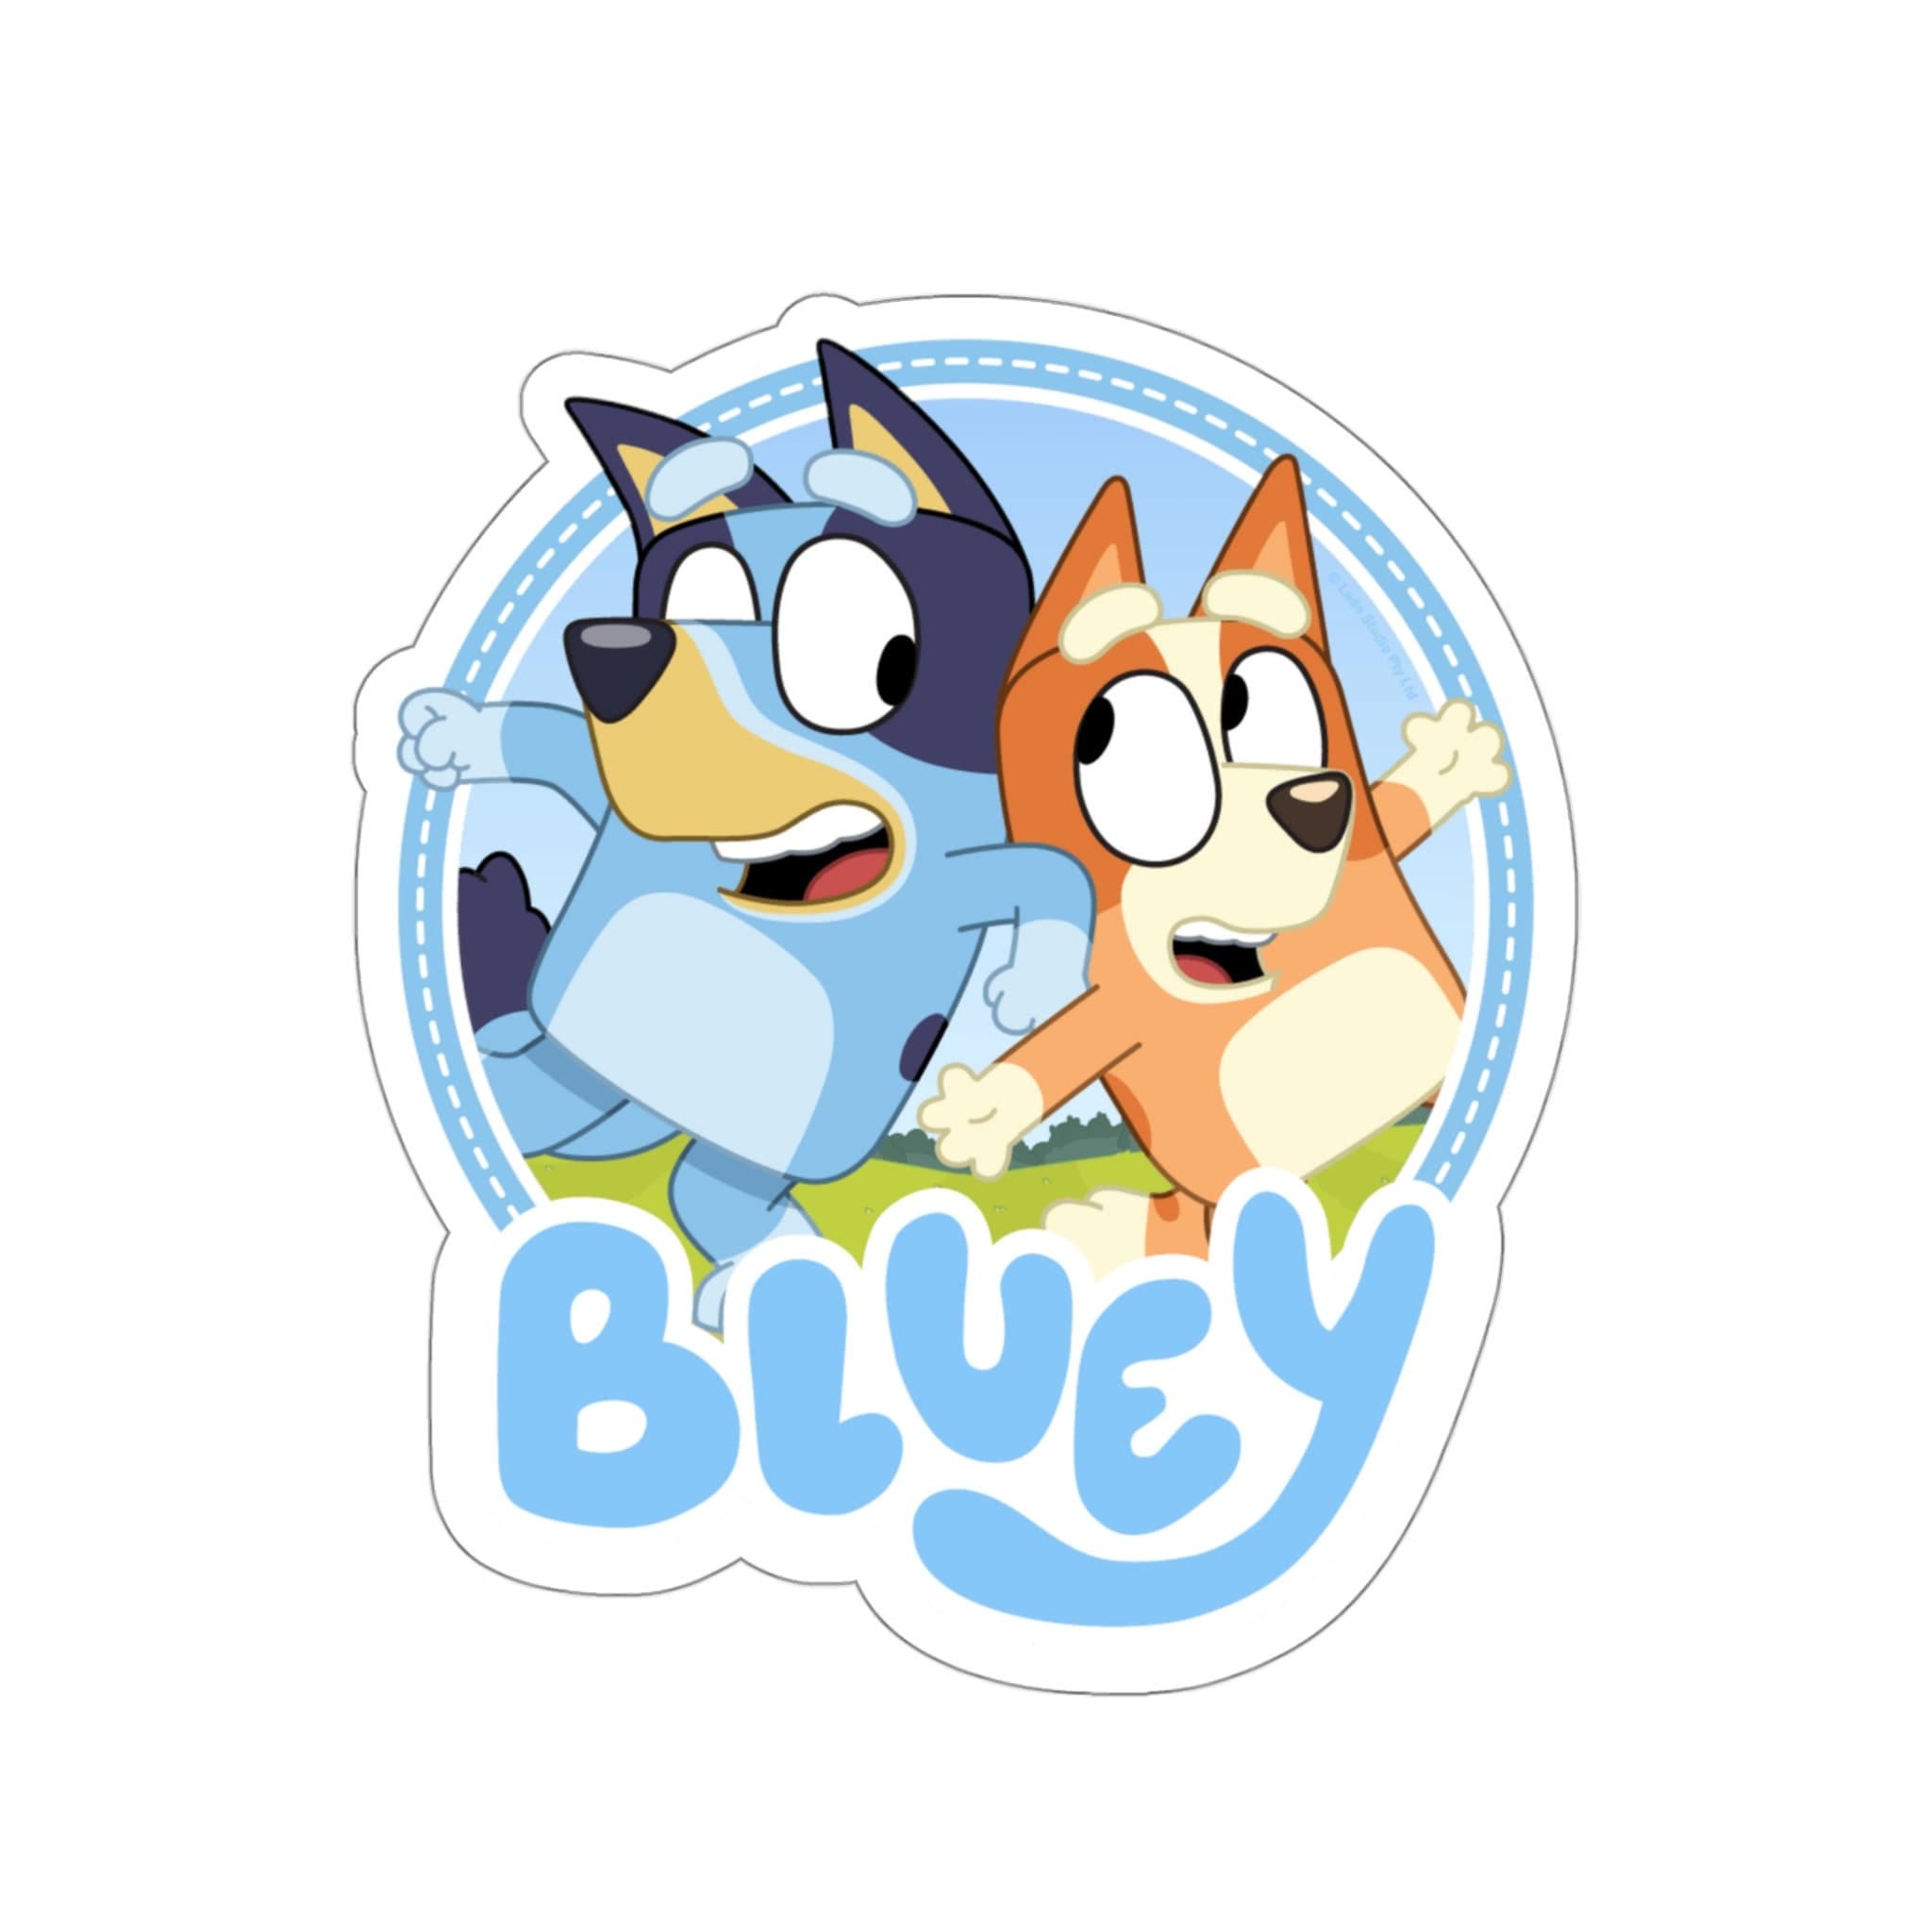 Bluey and Bingo Stickers - Decorate and Play with the Adorable Blue Heeler Siblings!